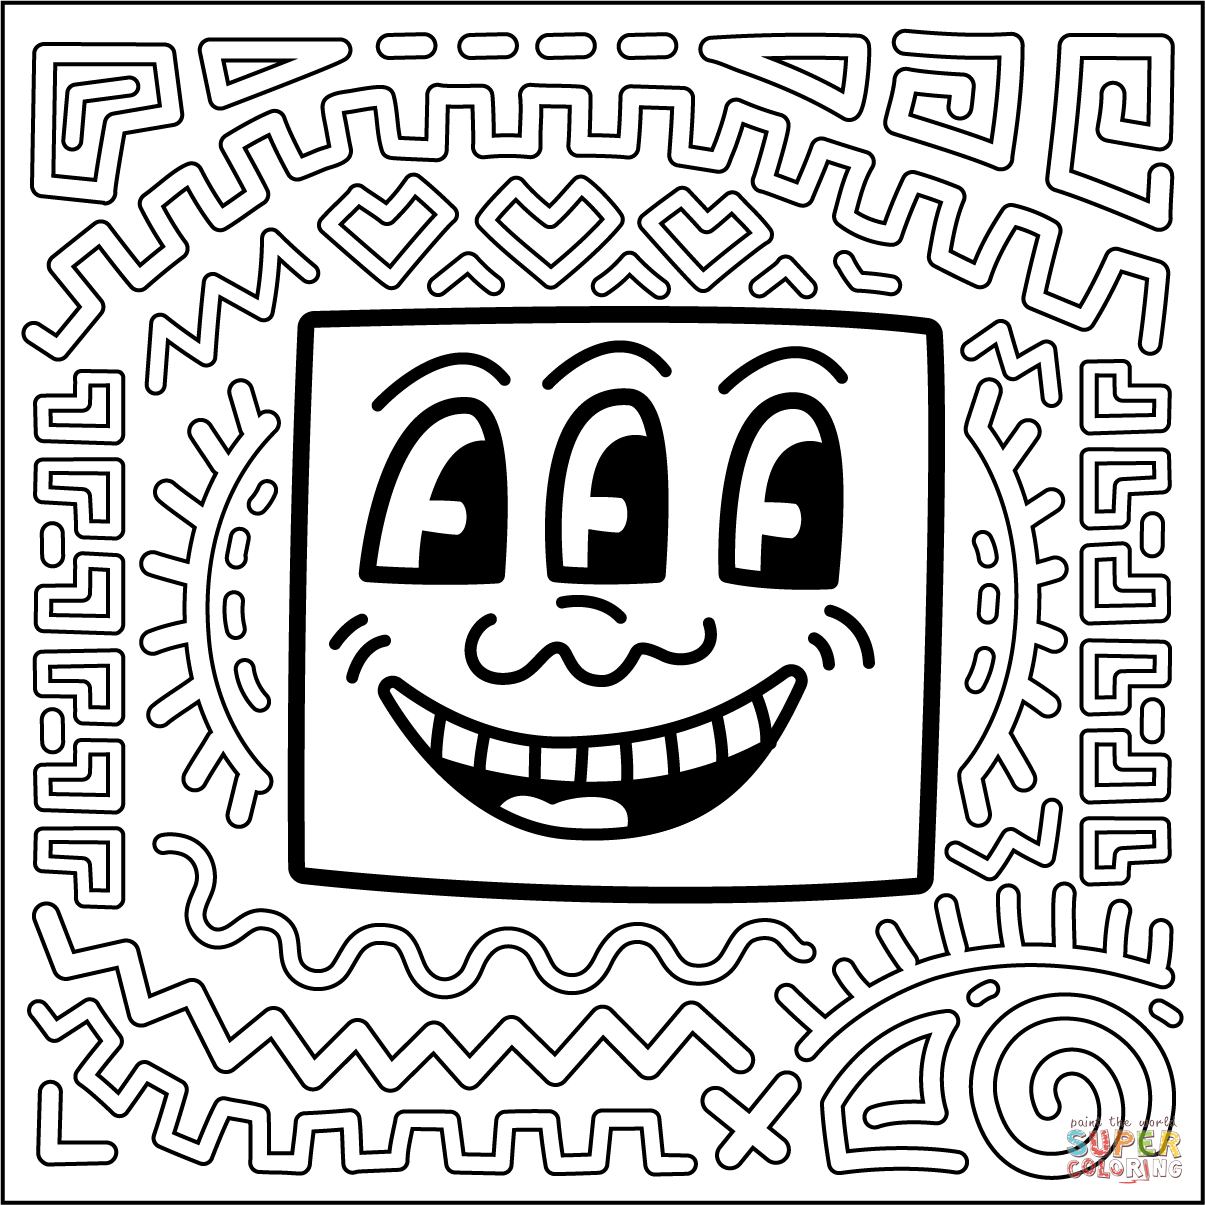 Keith haring style coloring page free printable coloring pages